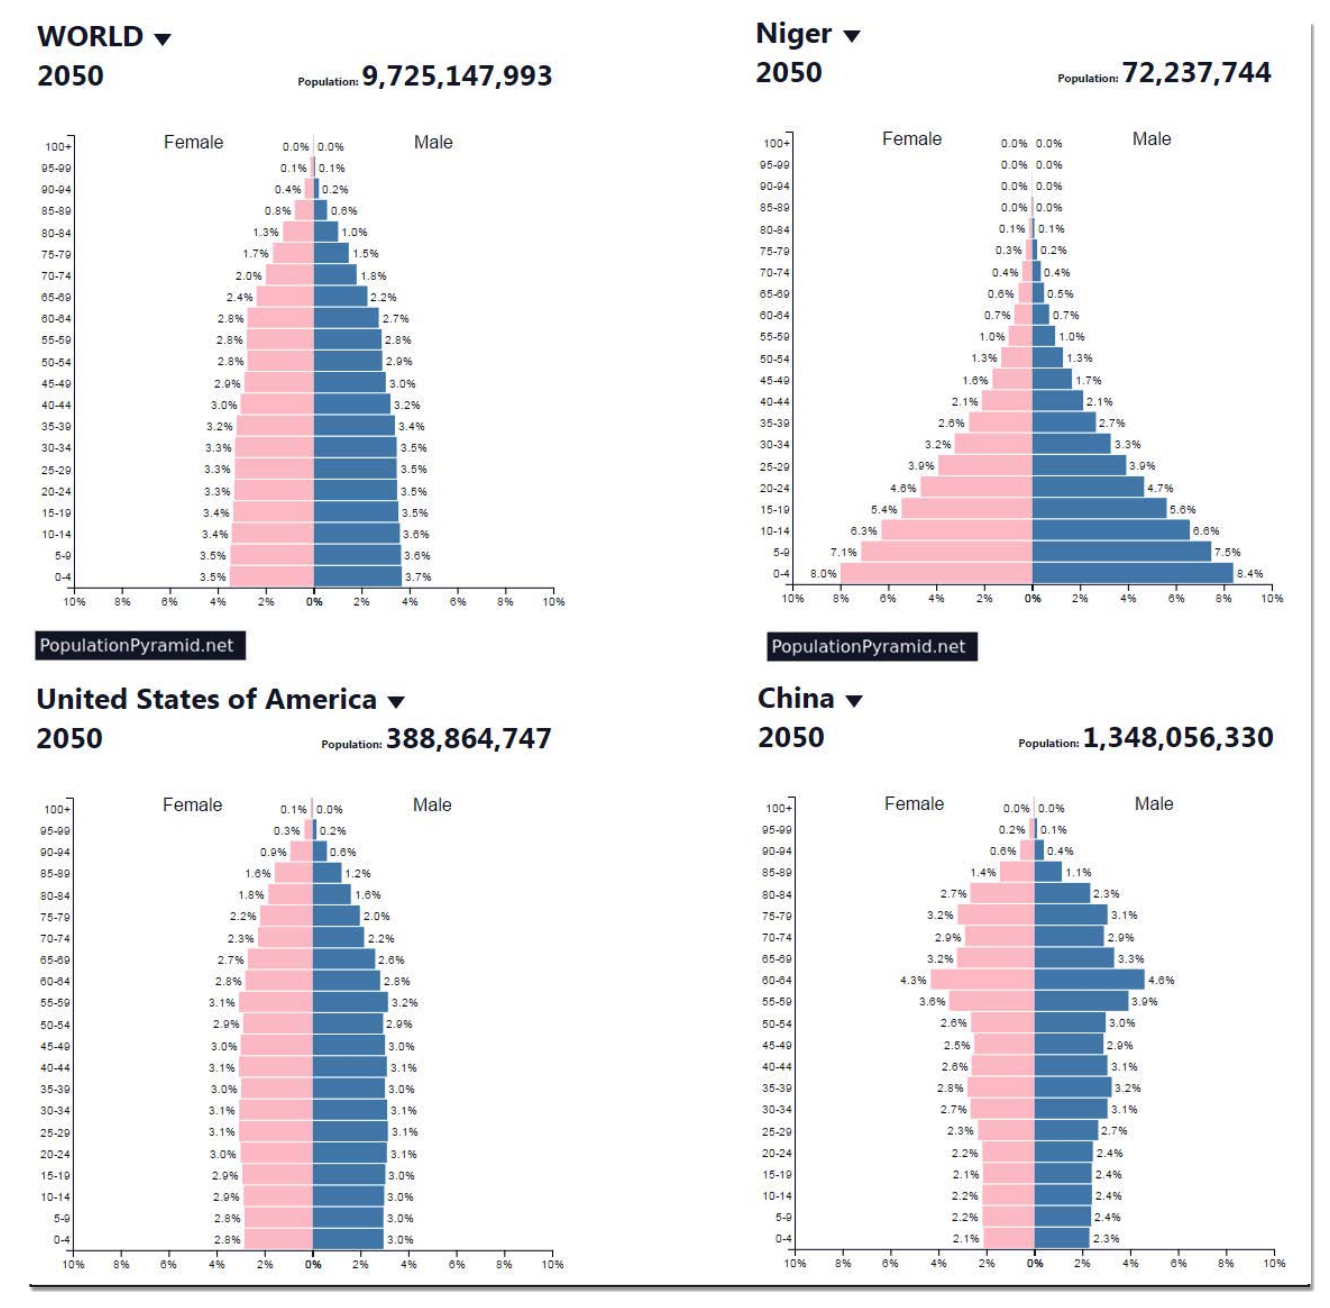 four graphs comparing the number of males and females in certain age ranges for the world, nigeria, united states of america, and china in 2016. Population totals are also predicted at: World - 9,725,147,993. Niger - 72,237,744. United States - 388,864,747. Chine - 1,348,056,330.